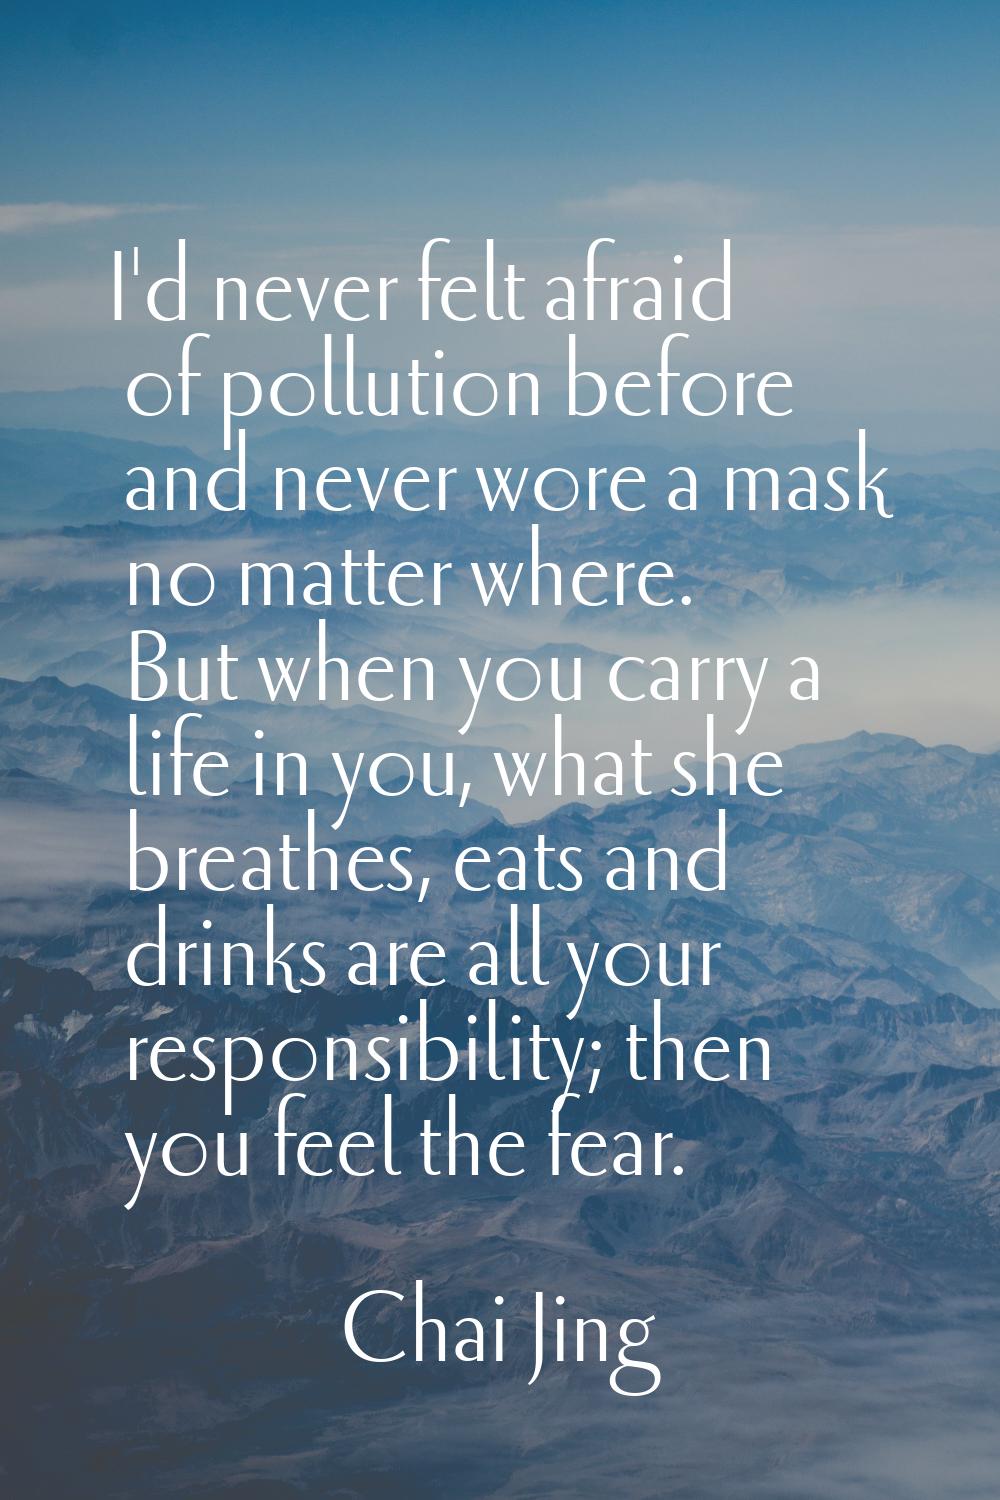 I'd never felt afraid of pollution before and never wore a mask no matter where. But when you carry